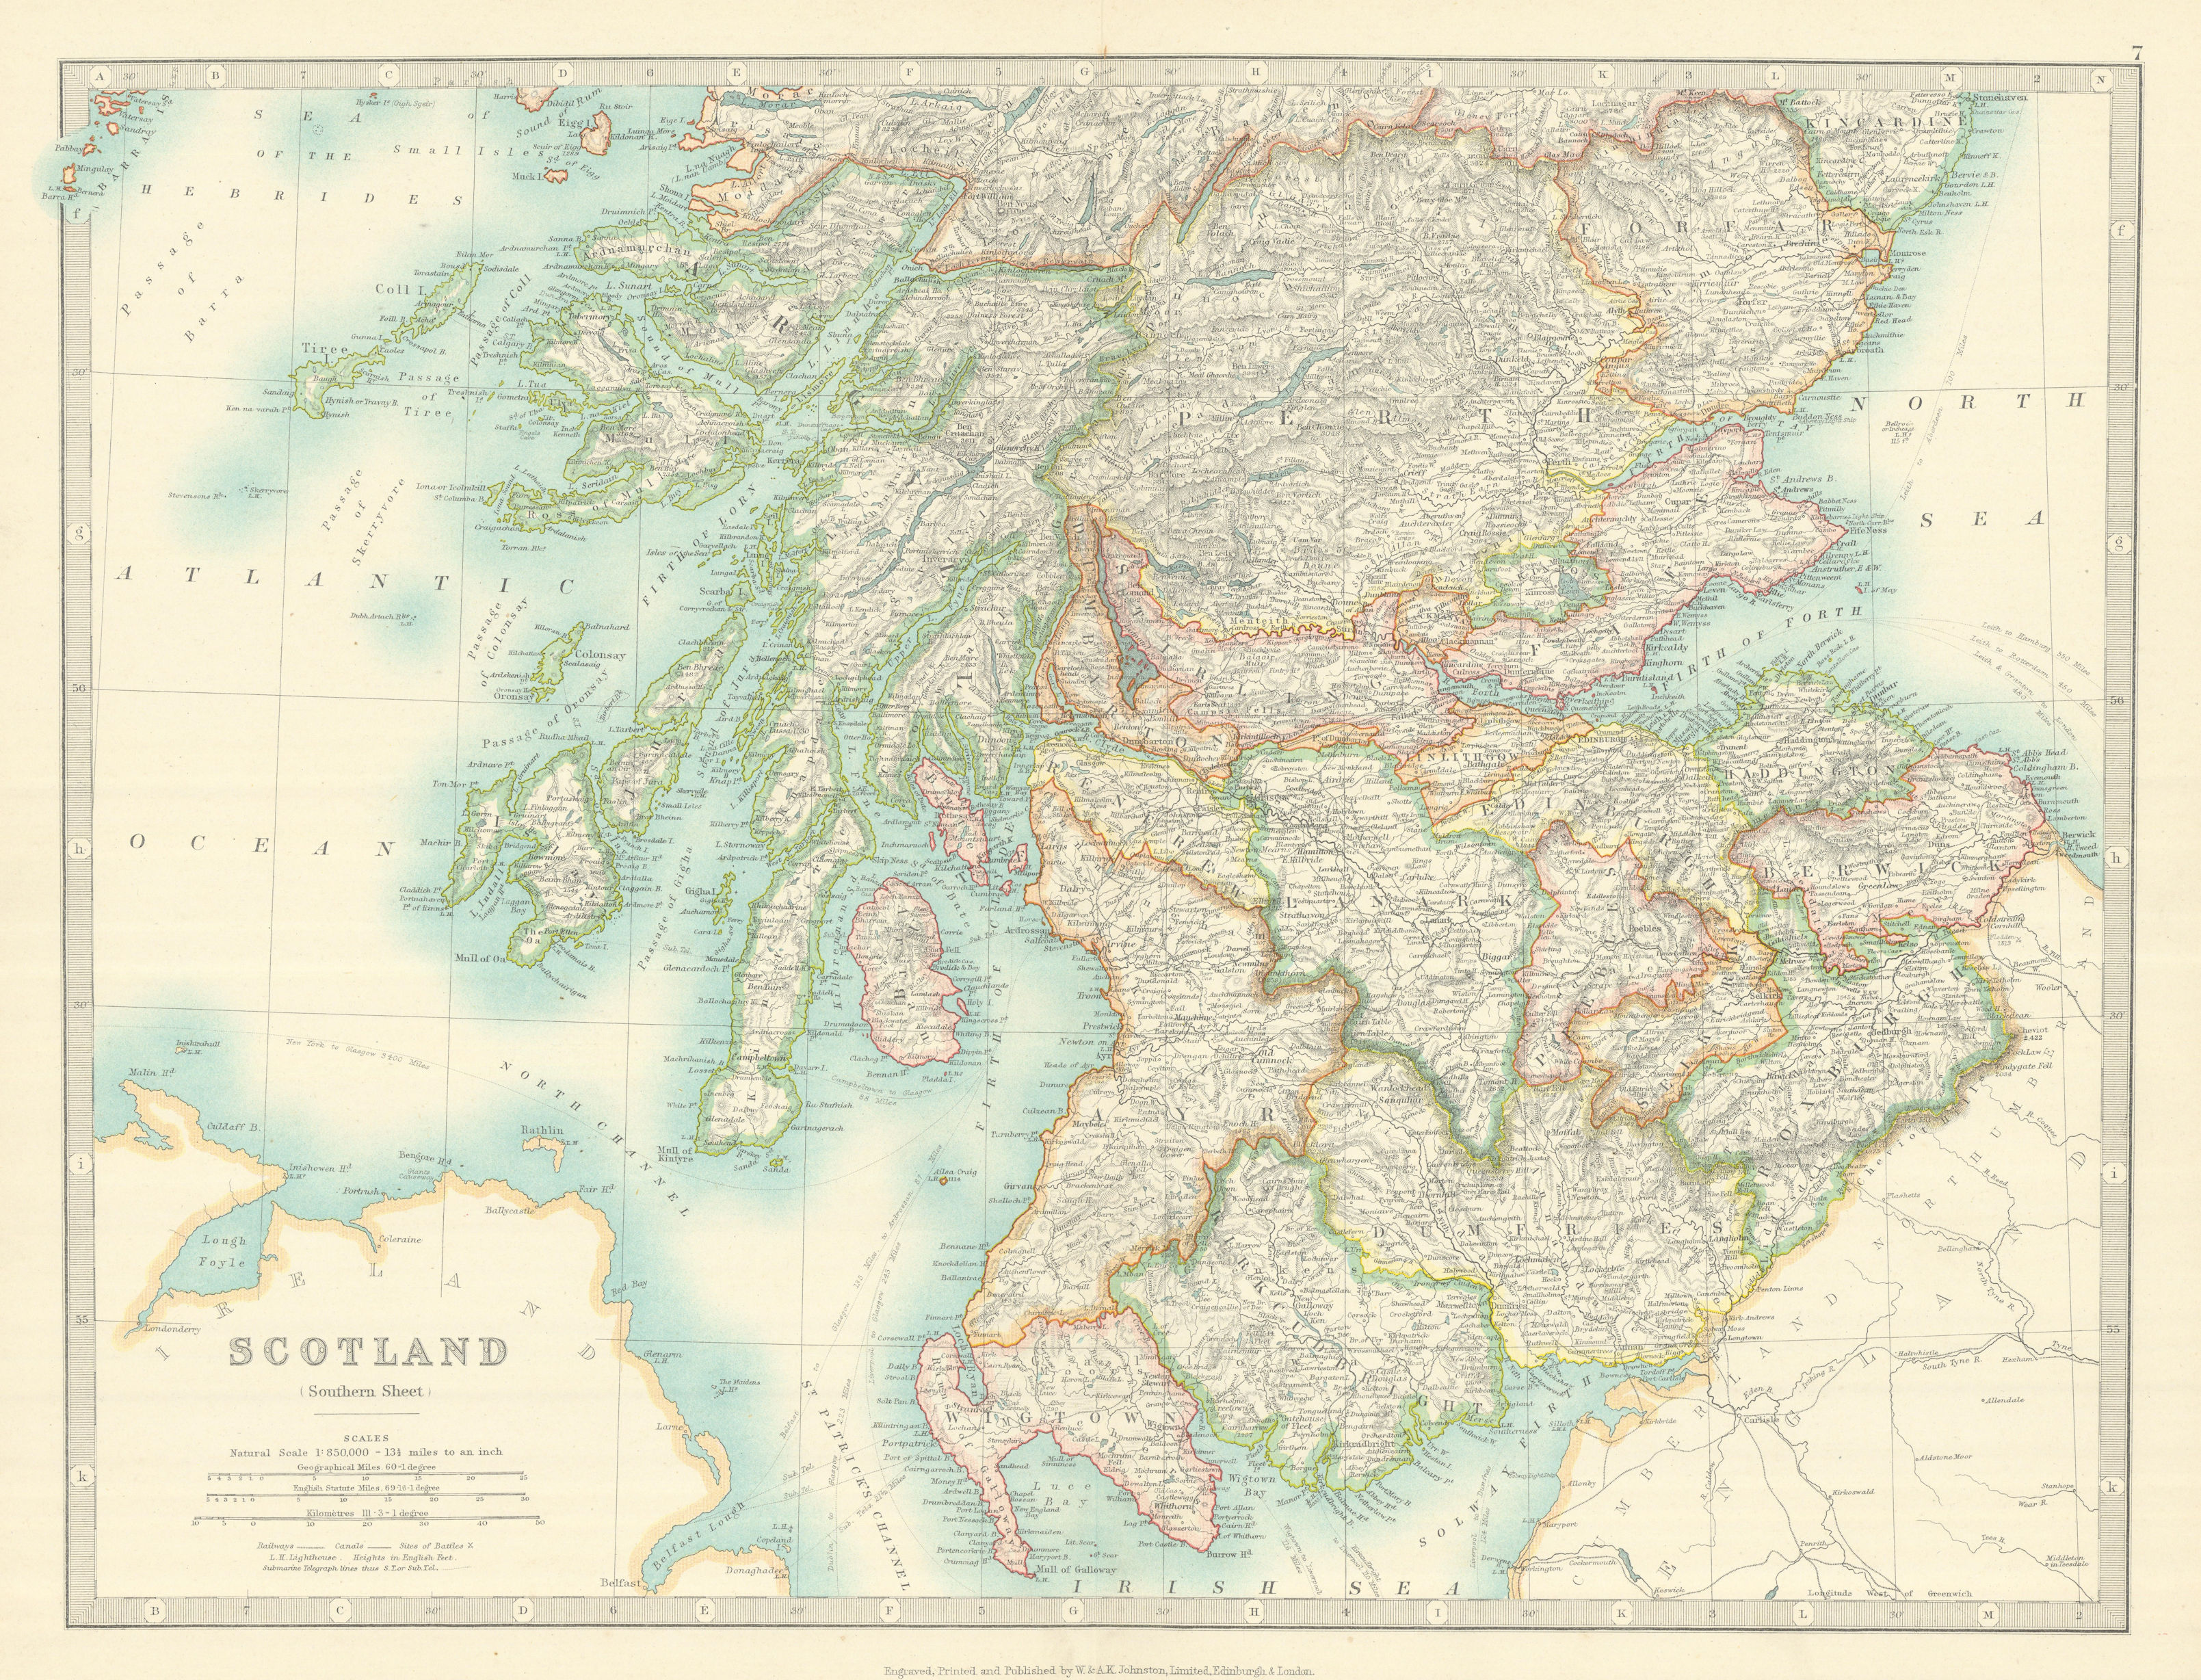 Associate Product SOUTHERN SCOTLAND showing battlefields and dates. JOHNSTON 1913 old map